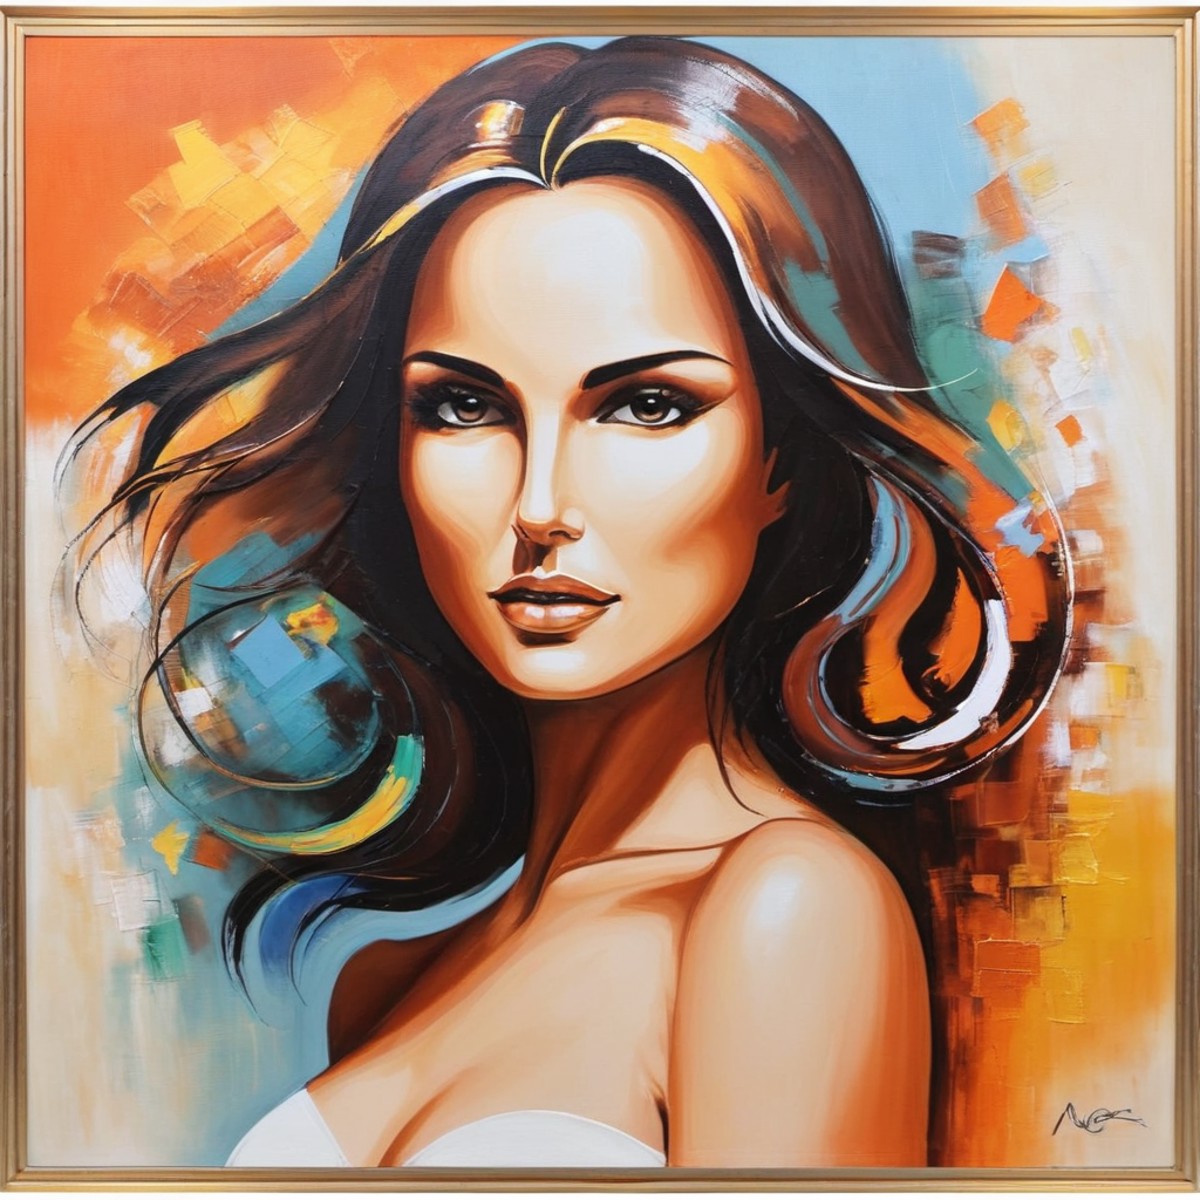 (Abstract) oil on canvas painting of a woman